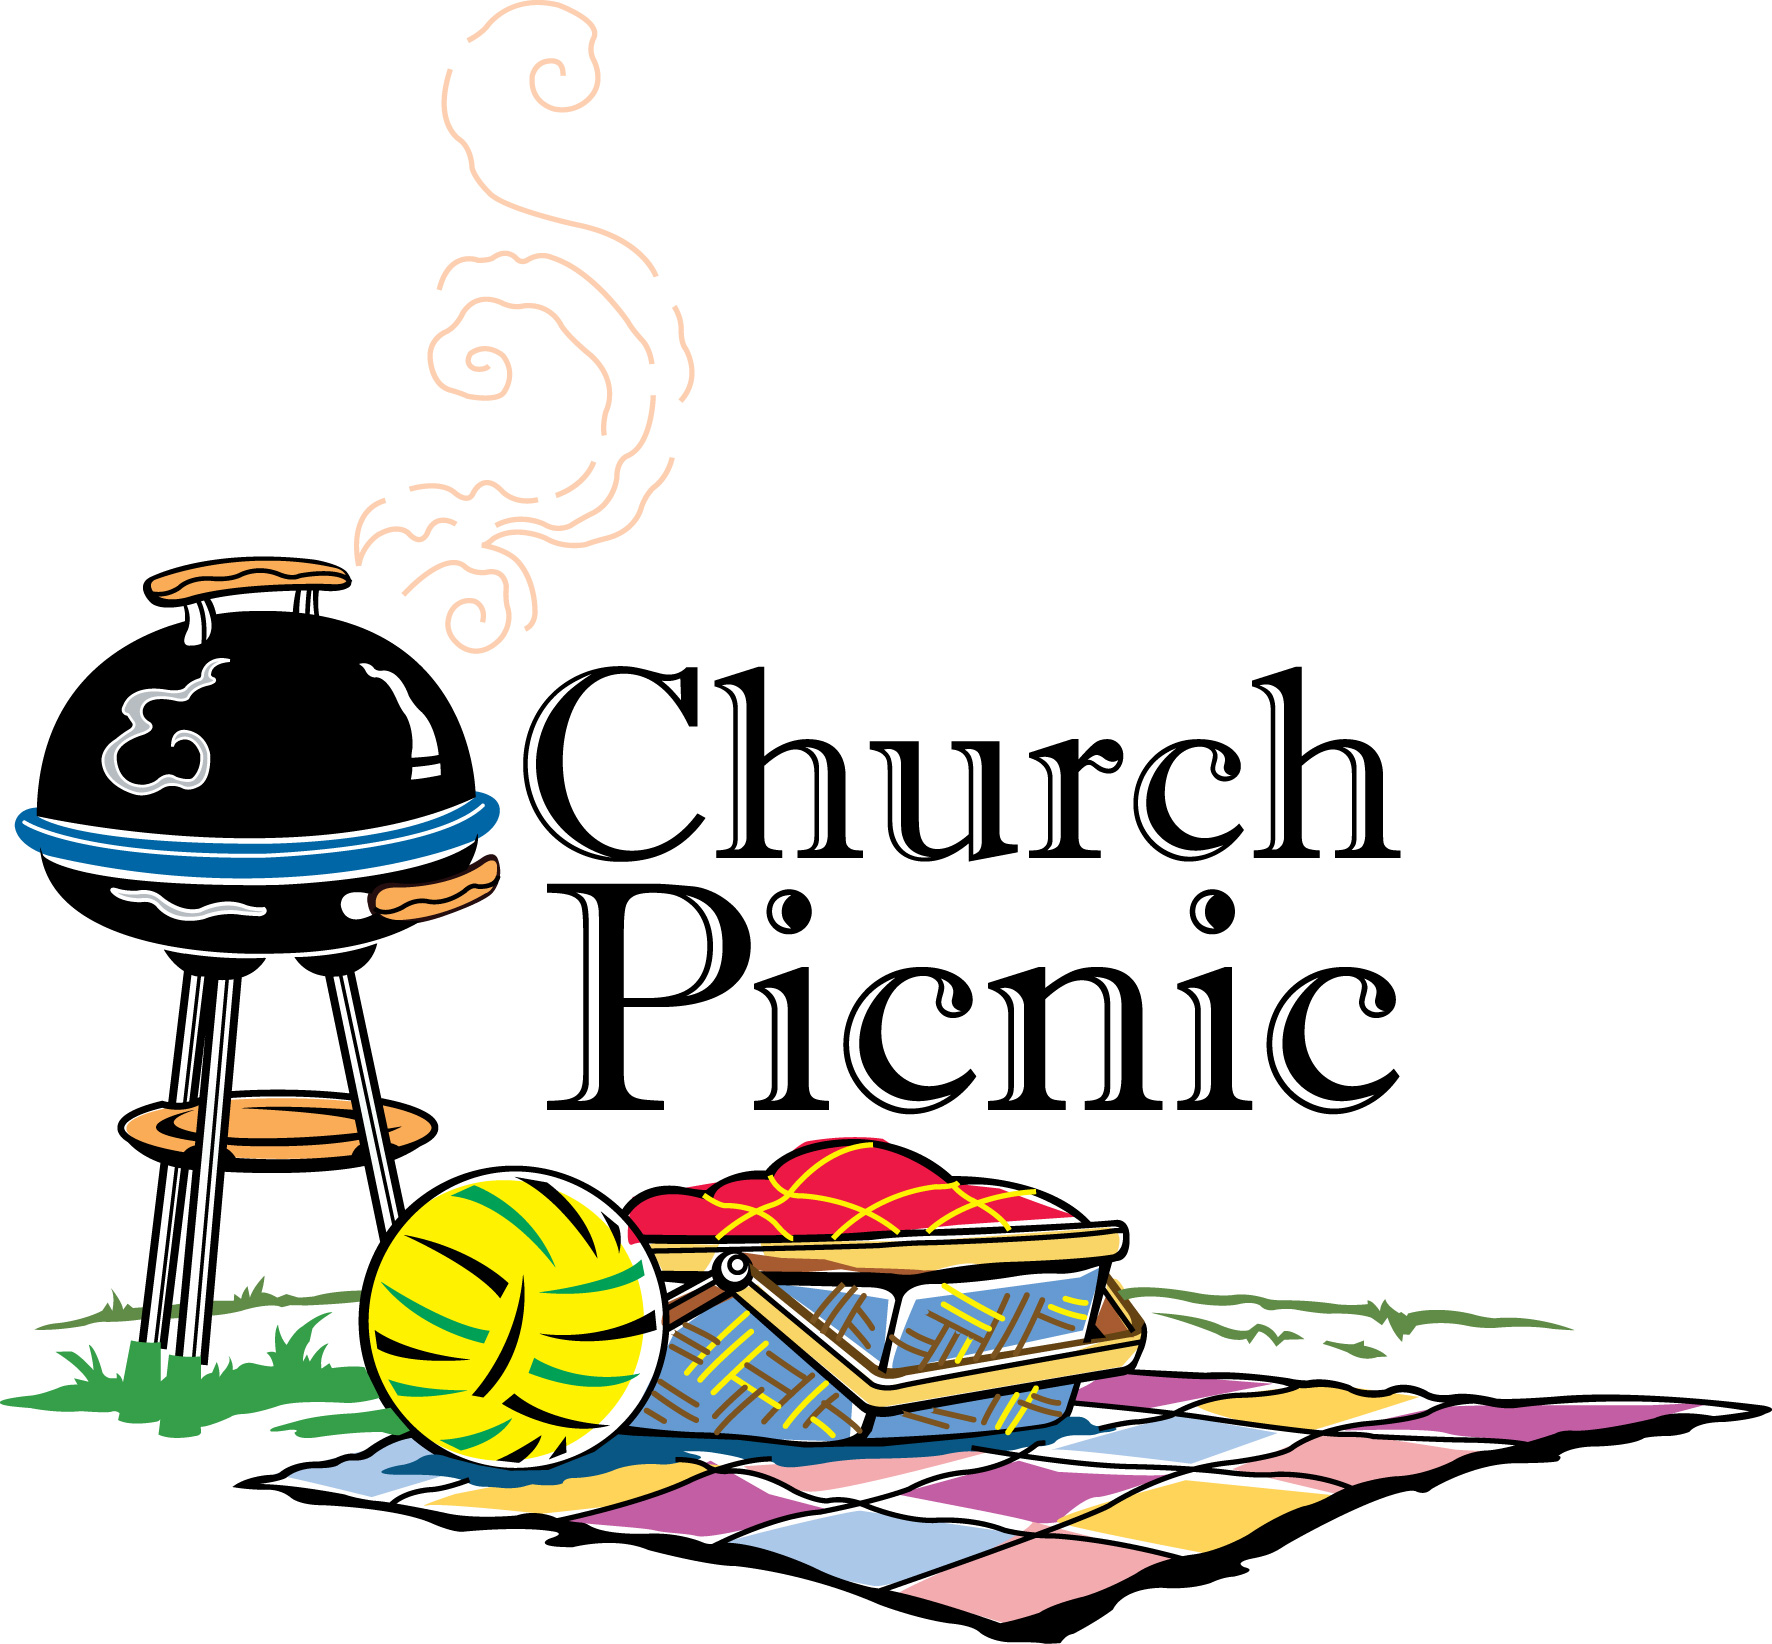 16 Picnic Images Free Cliparts That You Can Download To You Computer